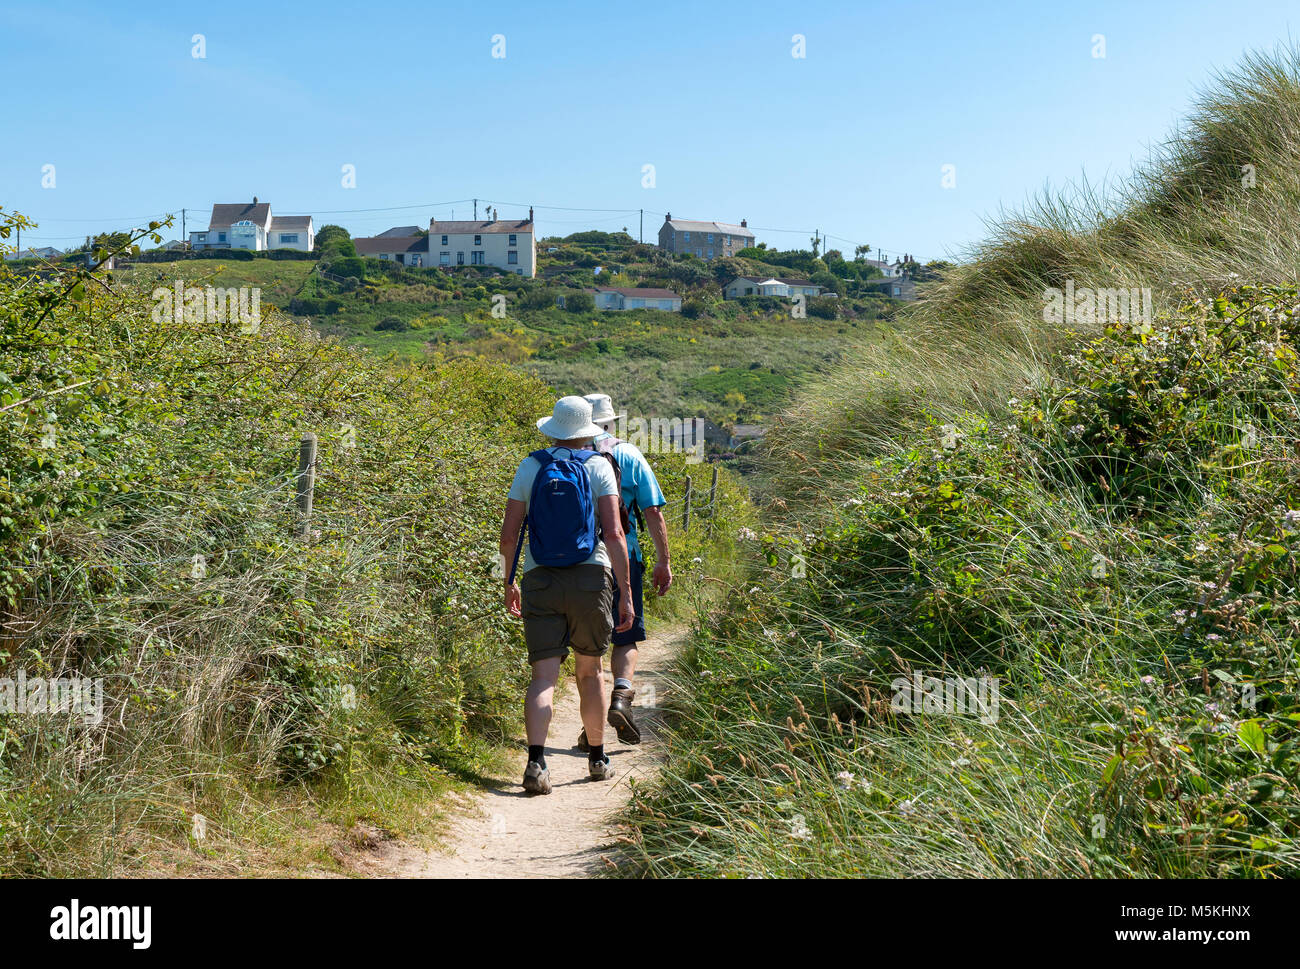 people walking on the south west coast path nears ennen cove in cornwall, england, britain, uk, Stock Photo